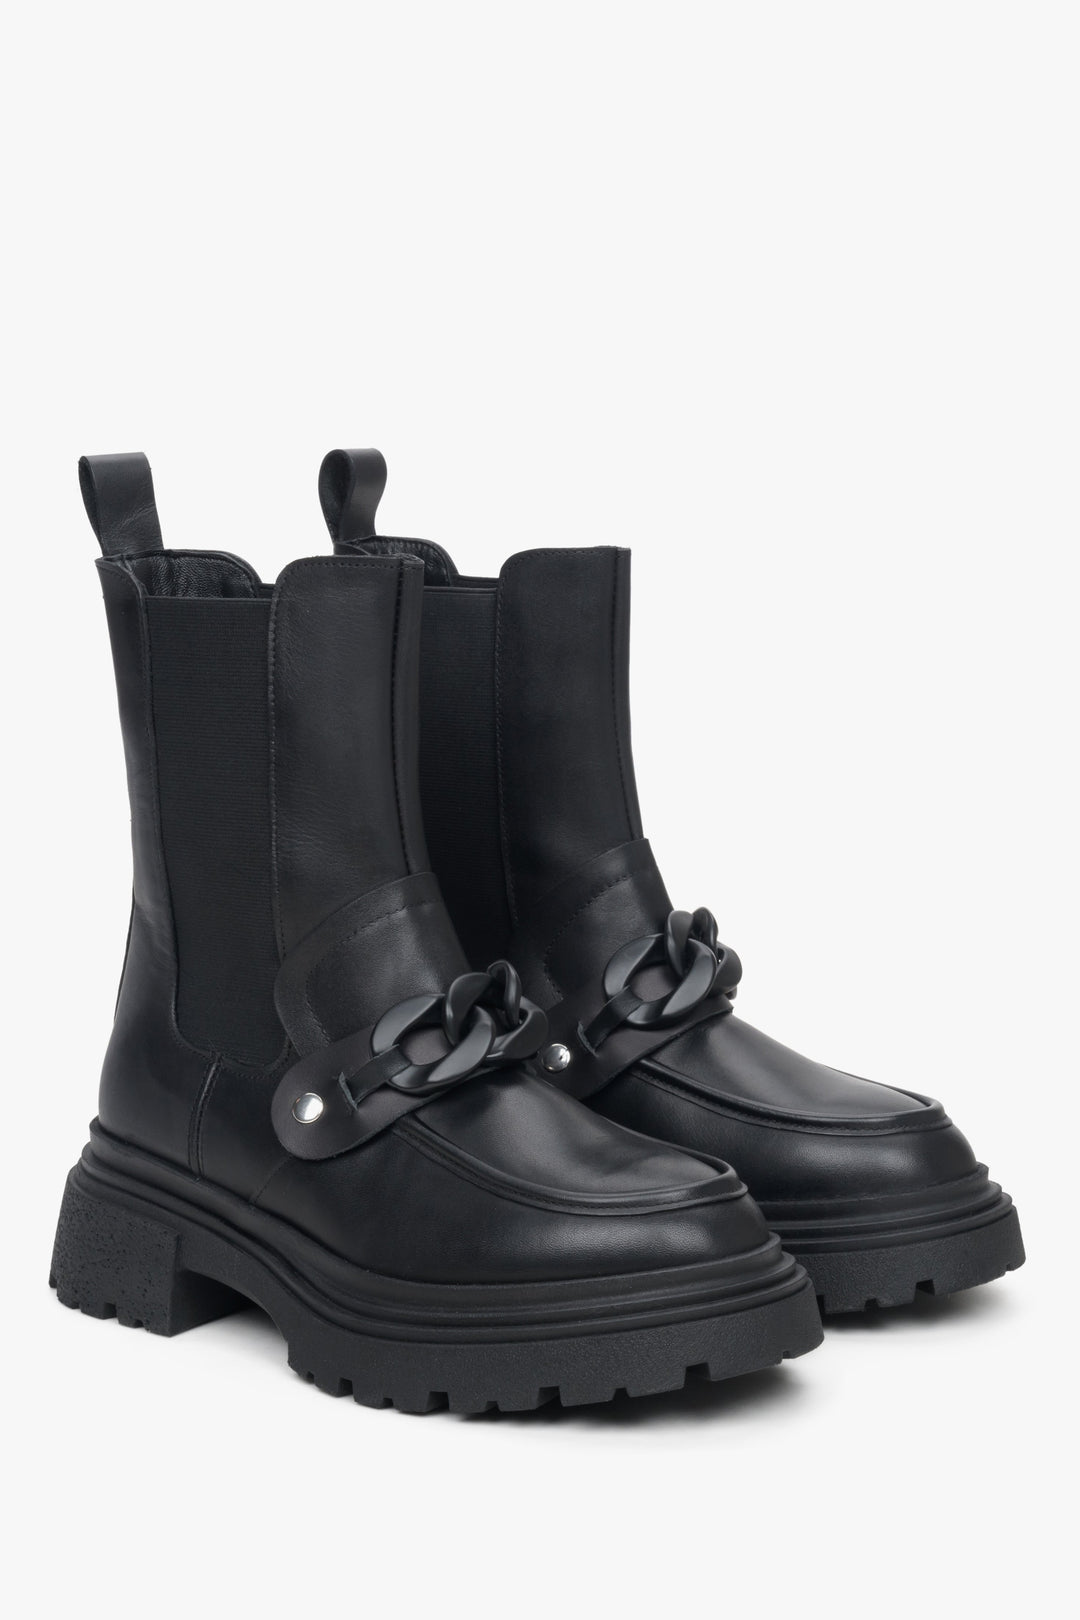 Women's black leather Chelsea boots by Estro with embellishment.